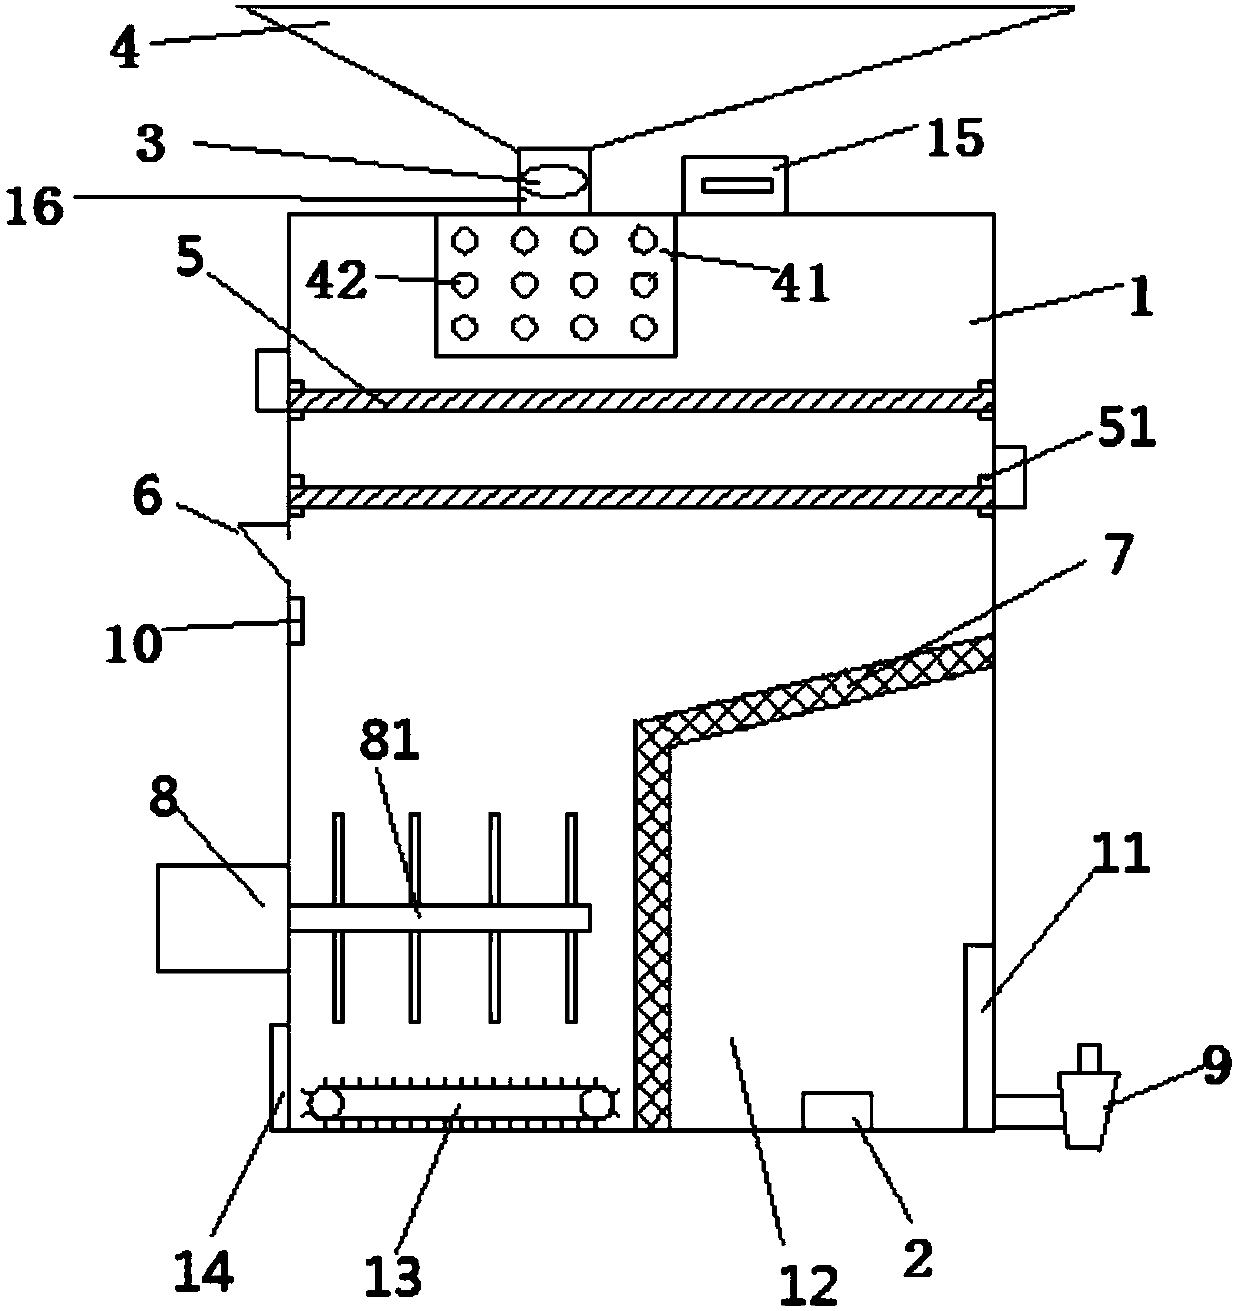 Device for collection and purification of rainwater in western regions